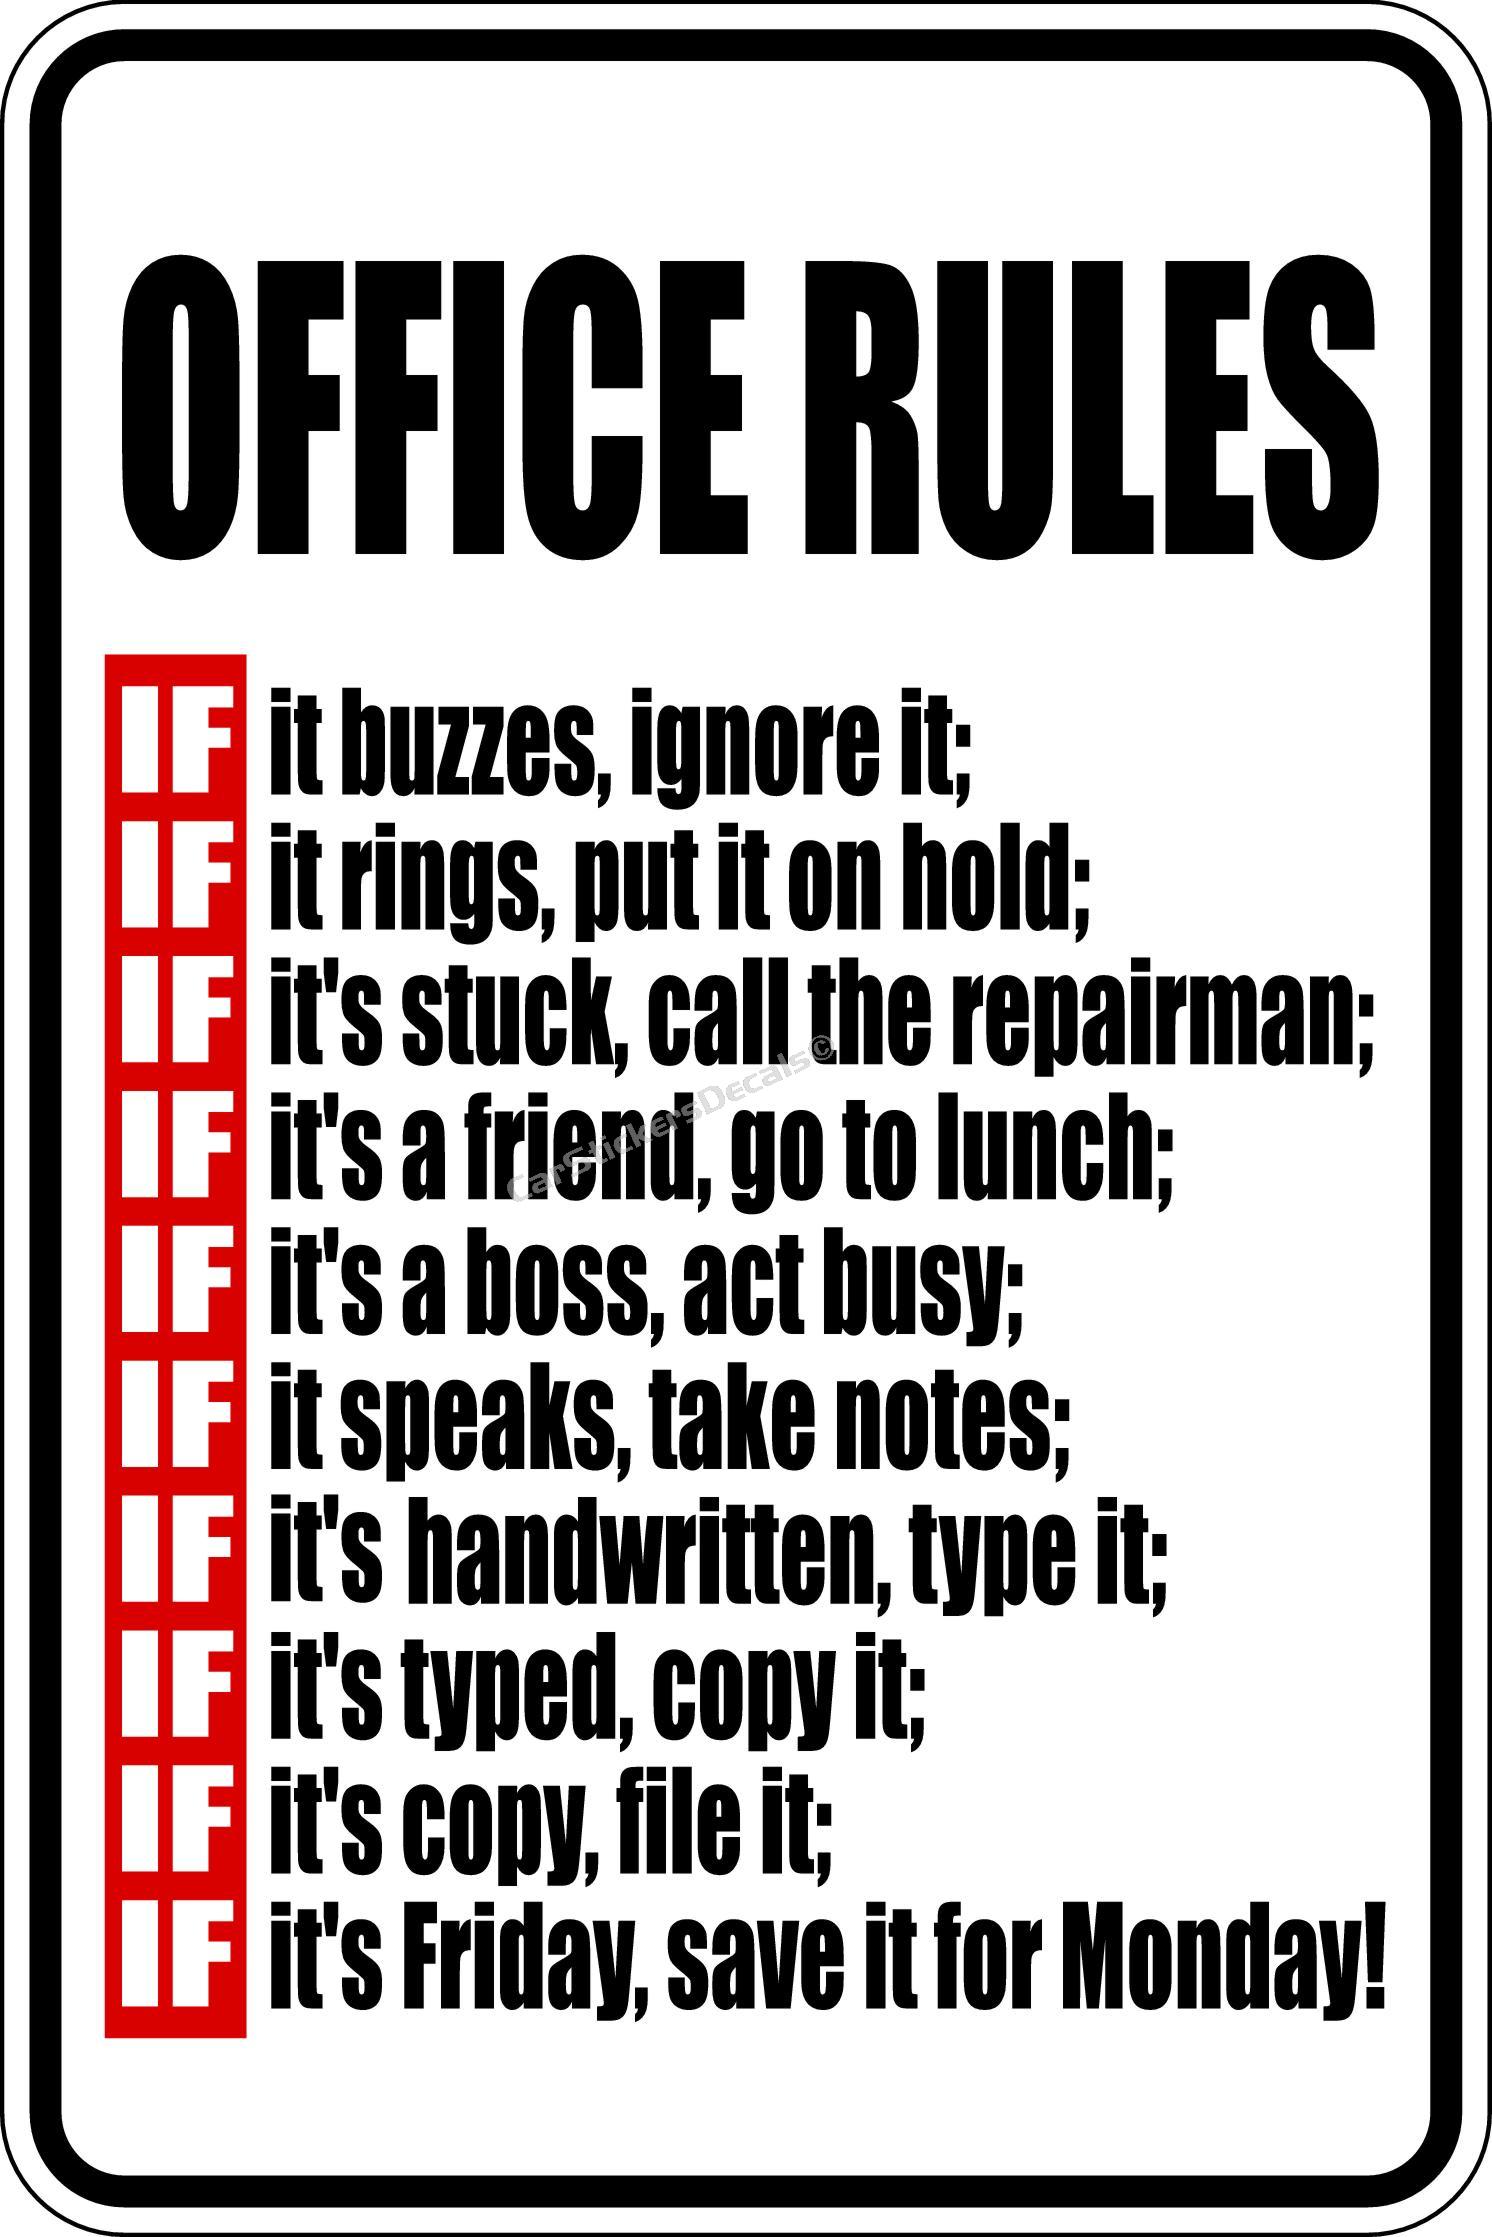 office-printable-images-gallery-category-page-1-printablee